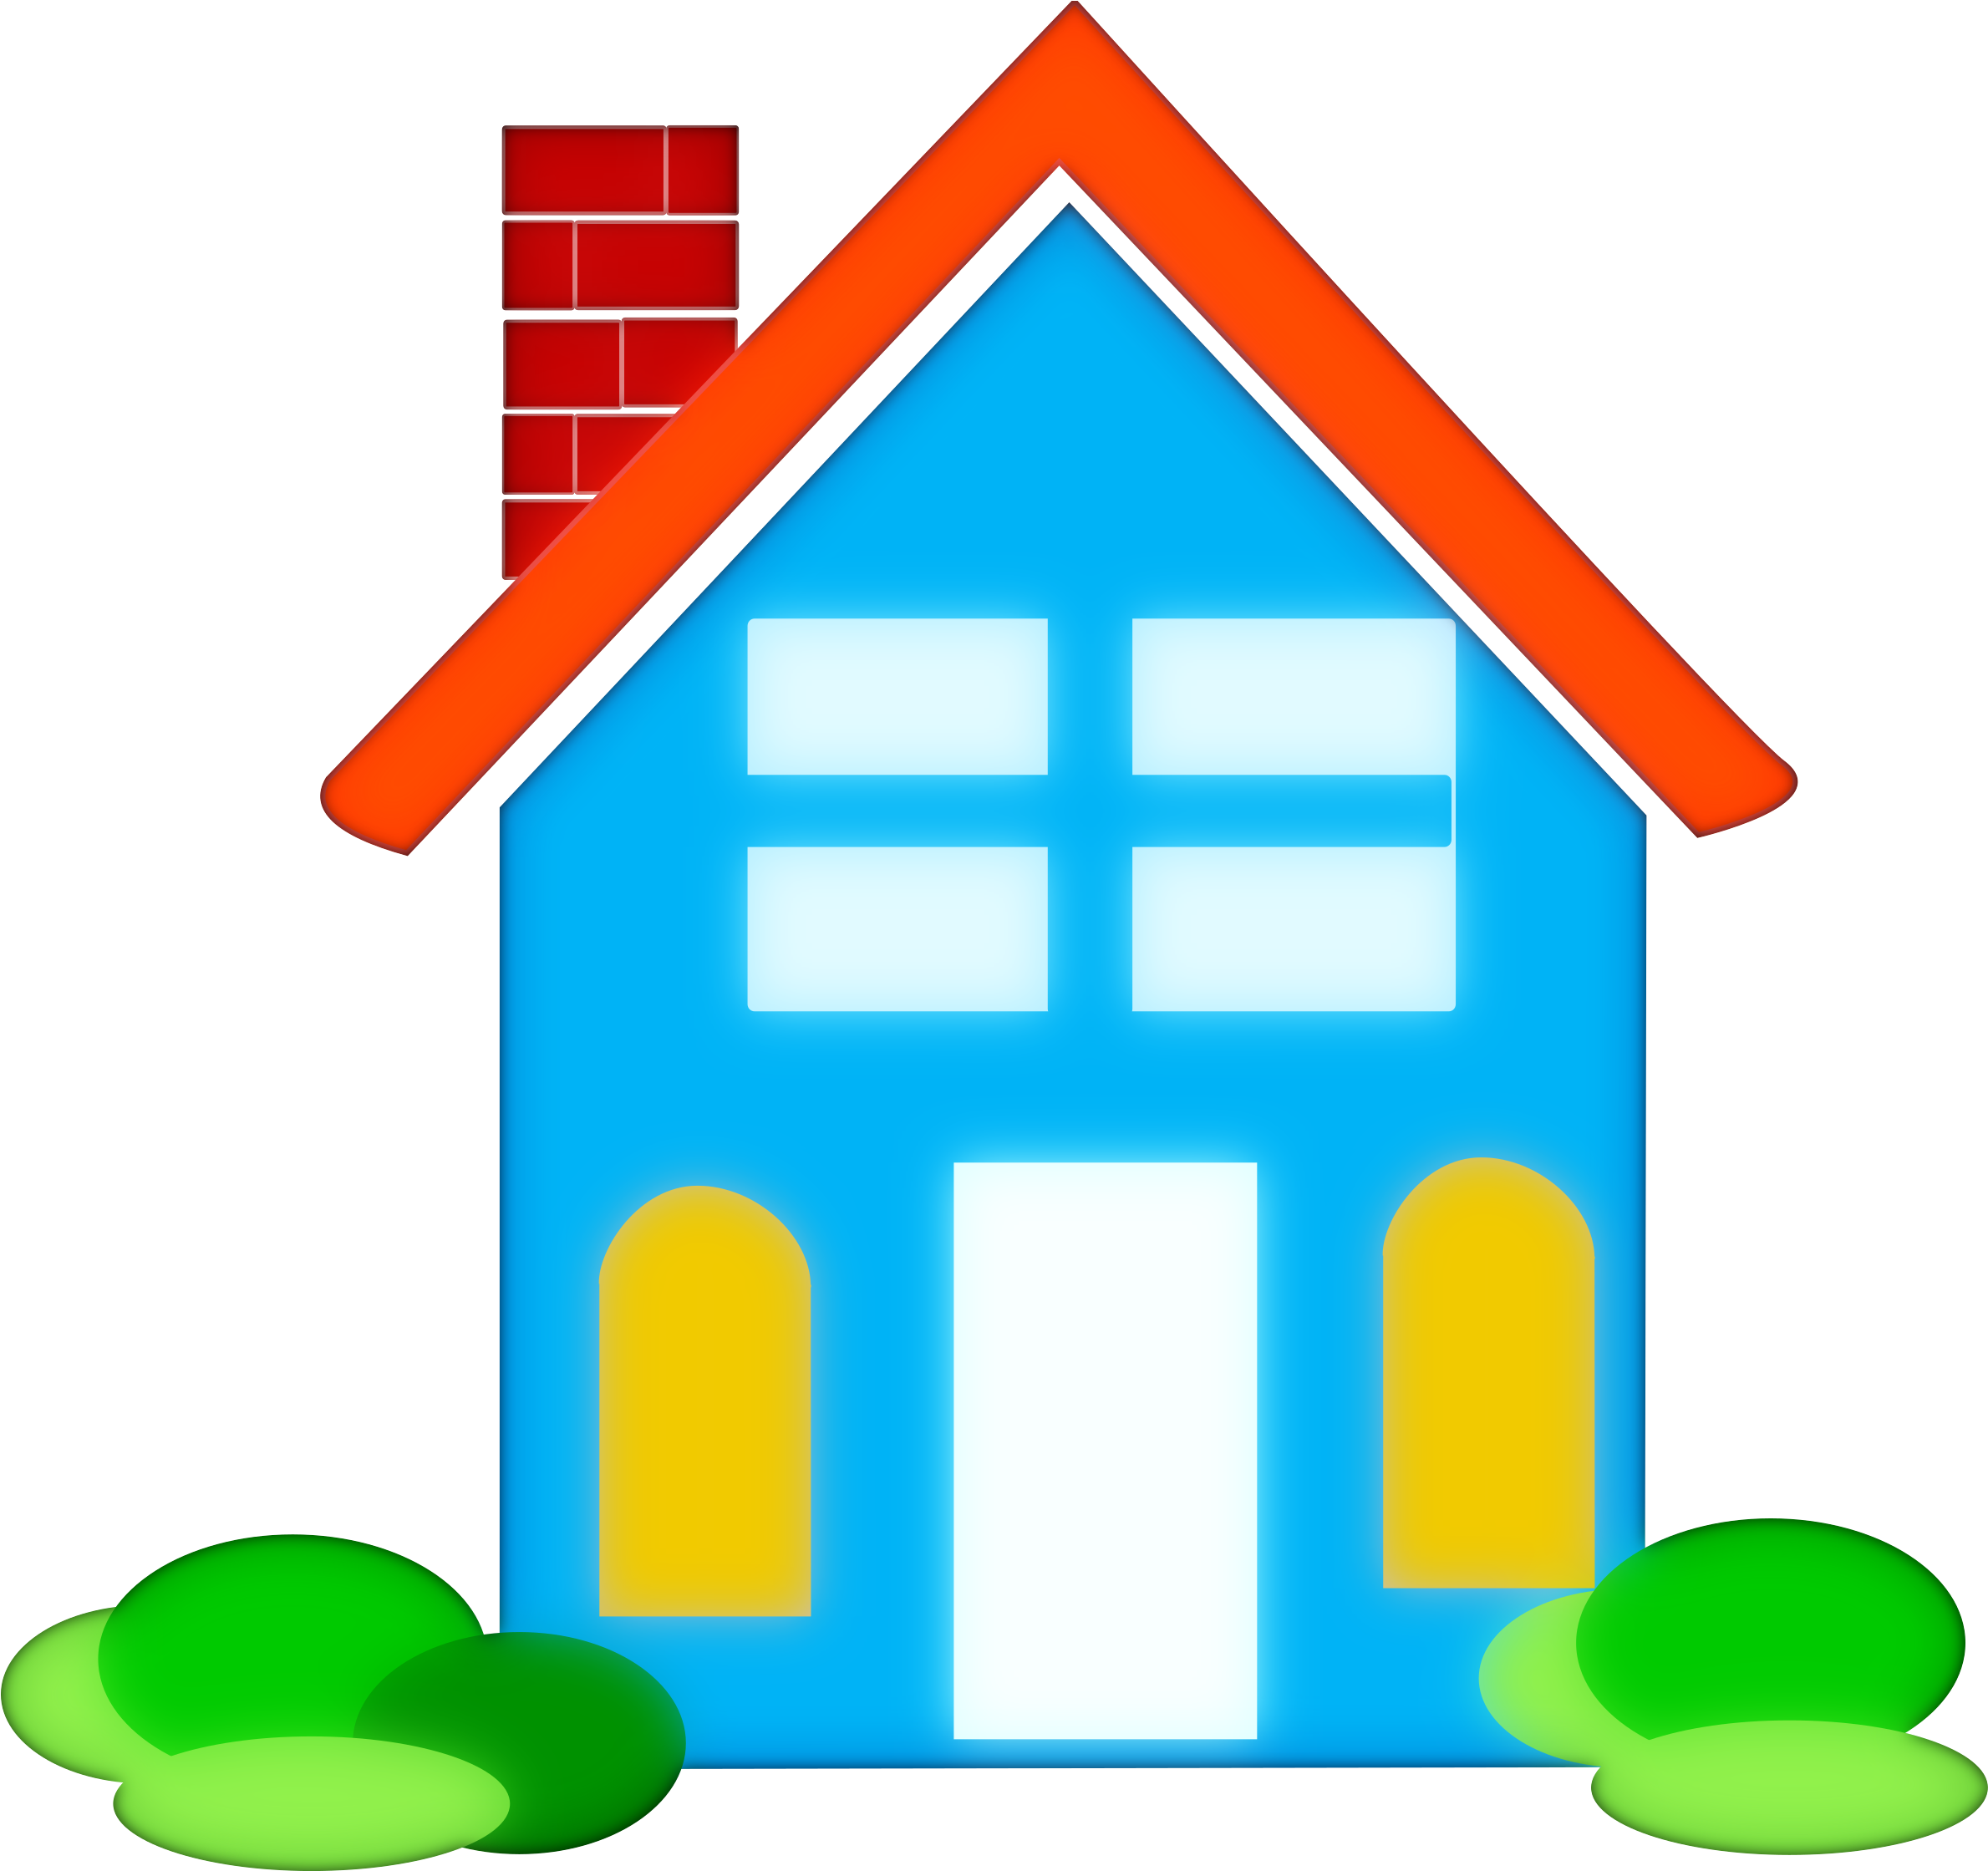 new home clipart to print